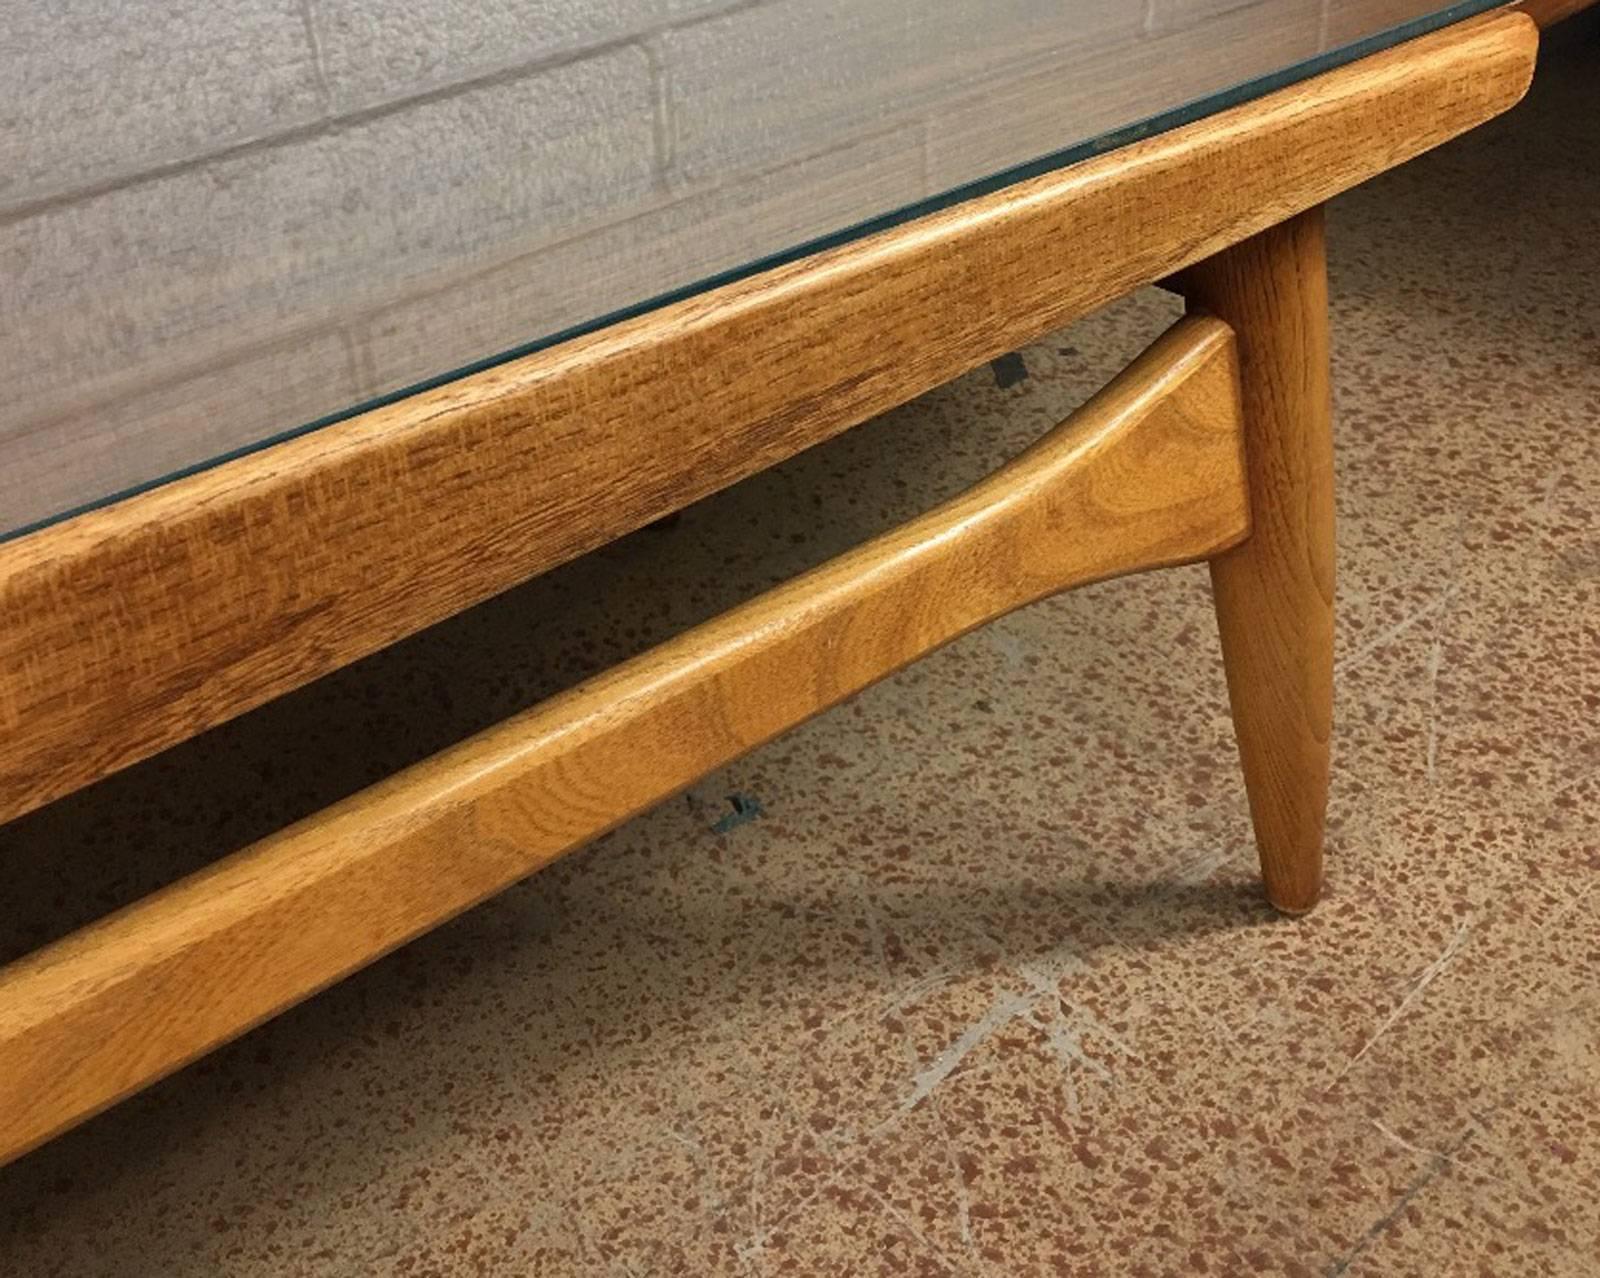 Lane surfboard coffee table by Lane Altavista. Professionally refurbished and finished. Exceptional length and condition. Original glass in excellent condition.